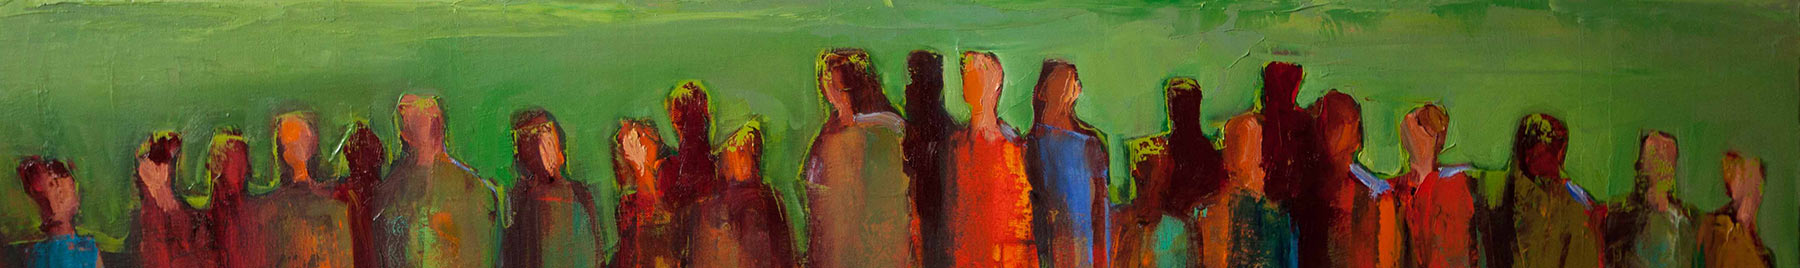 painting of people standing in a row